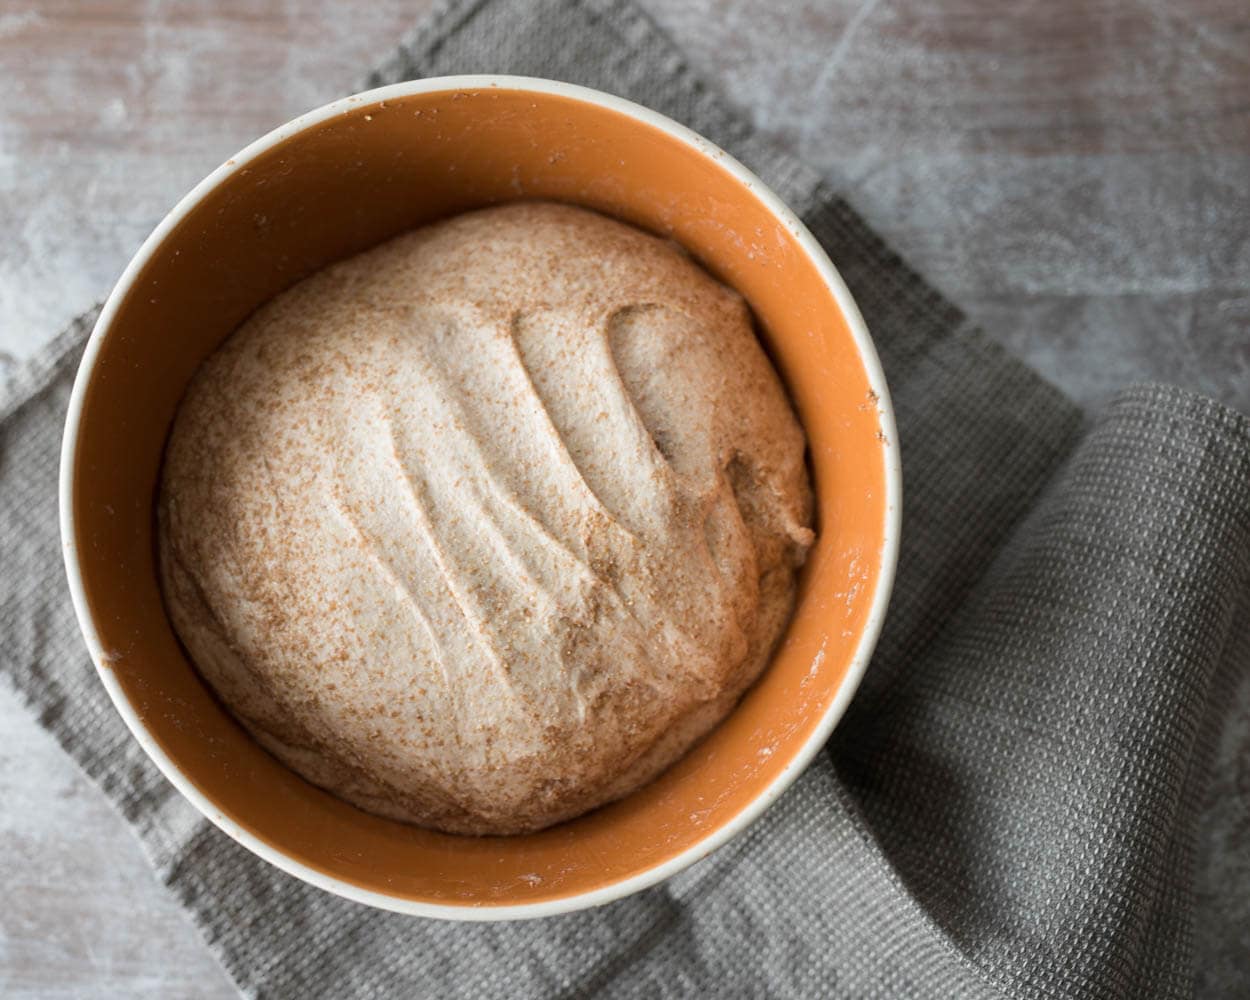 Whole wheat dough without sifted bran